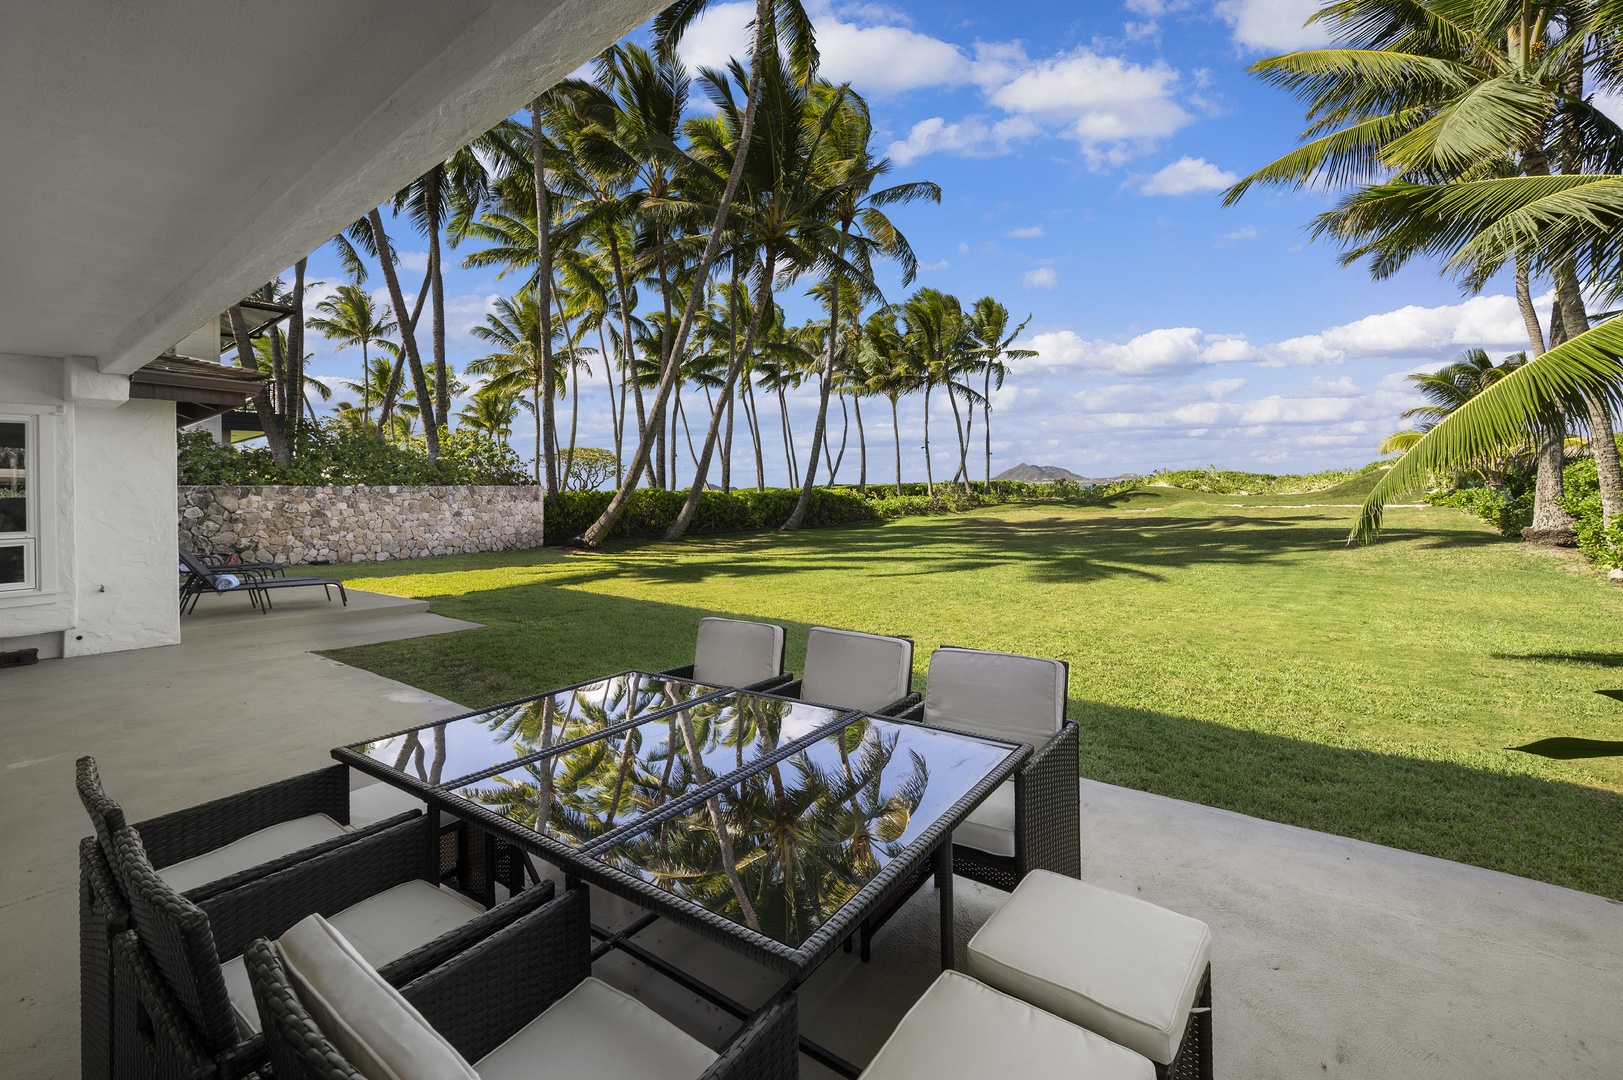 Kailua Vacation Rentals, Kailua Hale Kahakai - Enjoy some time in the shaded outdoor seating area with gorgeous tropical views